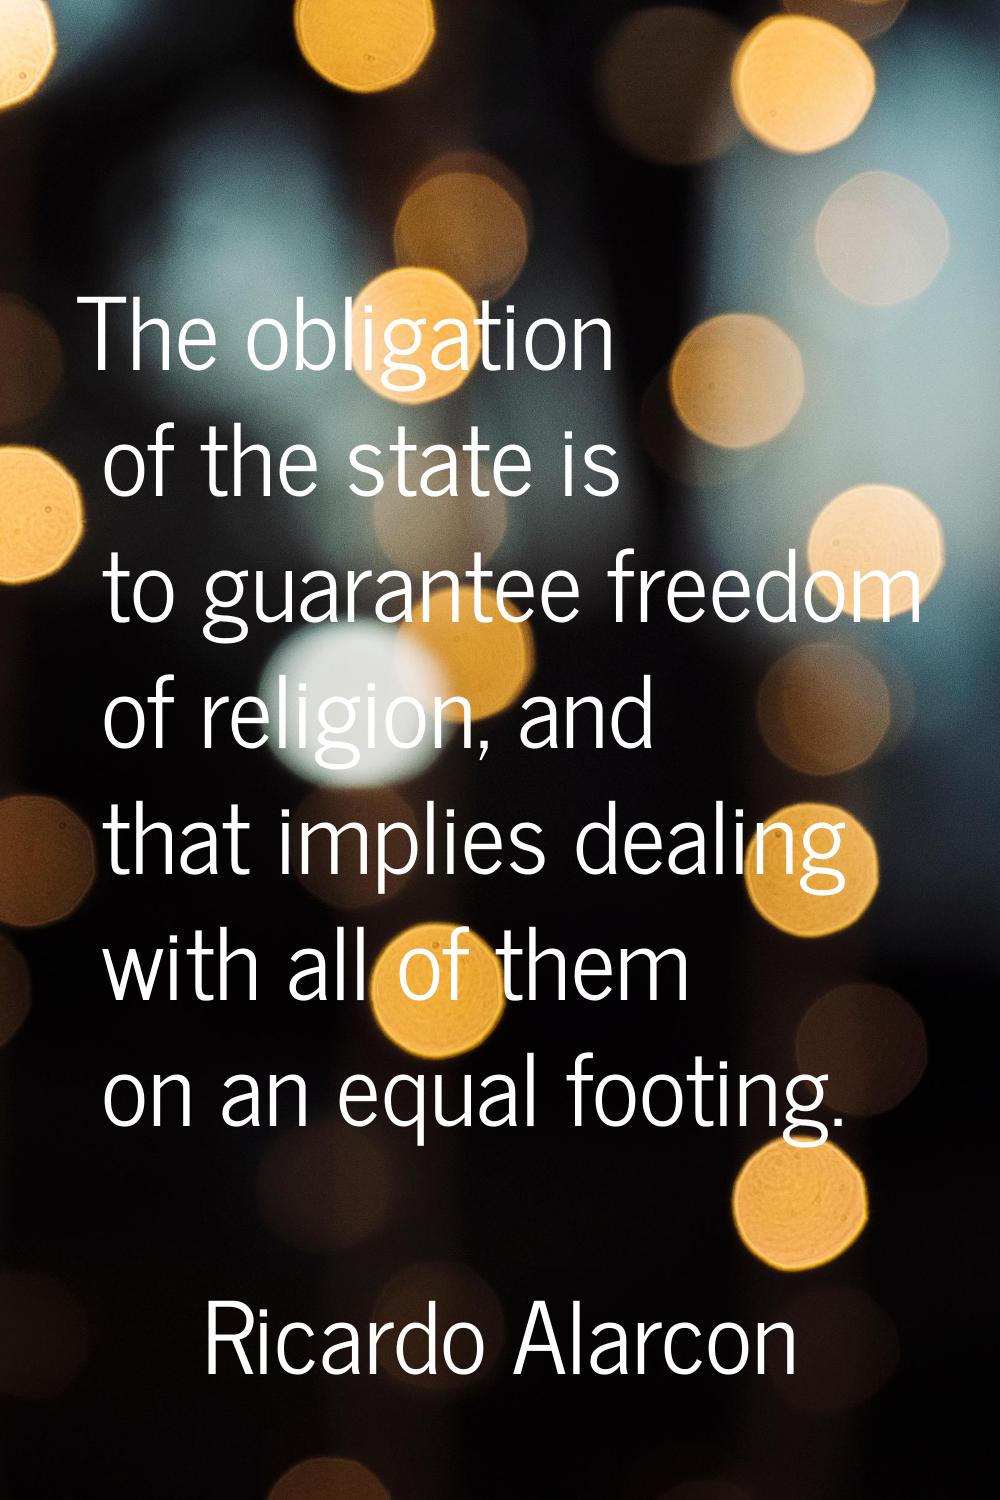 The obligation of the state is to guarantee freedom of religion, and that implies dealing with all 